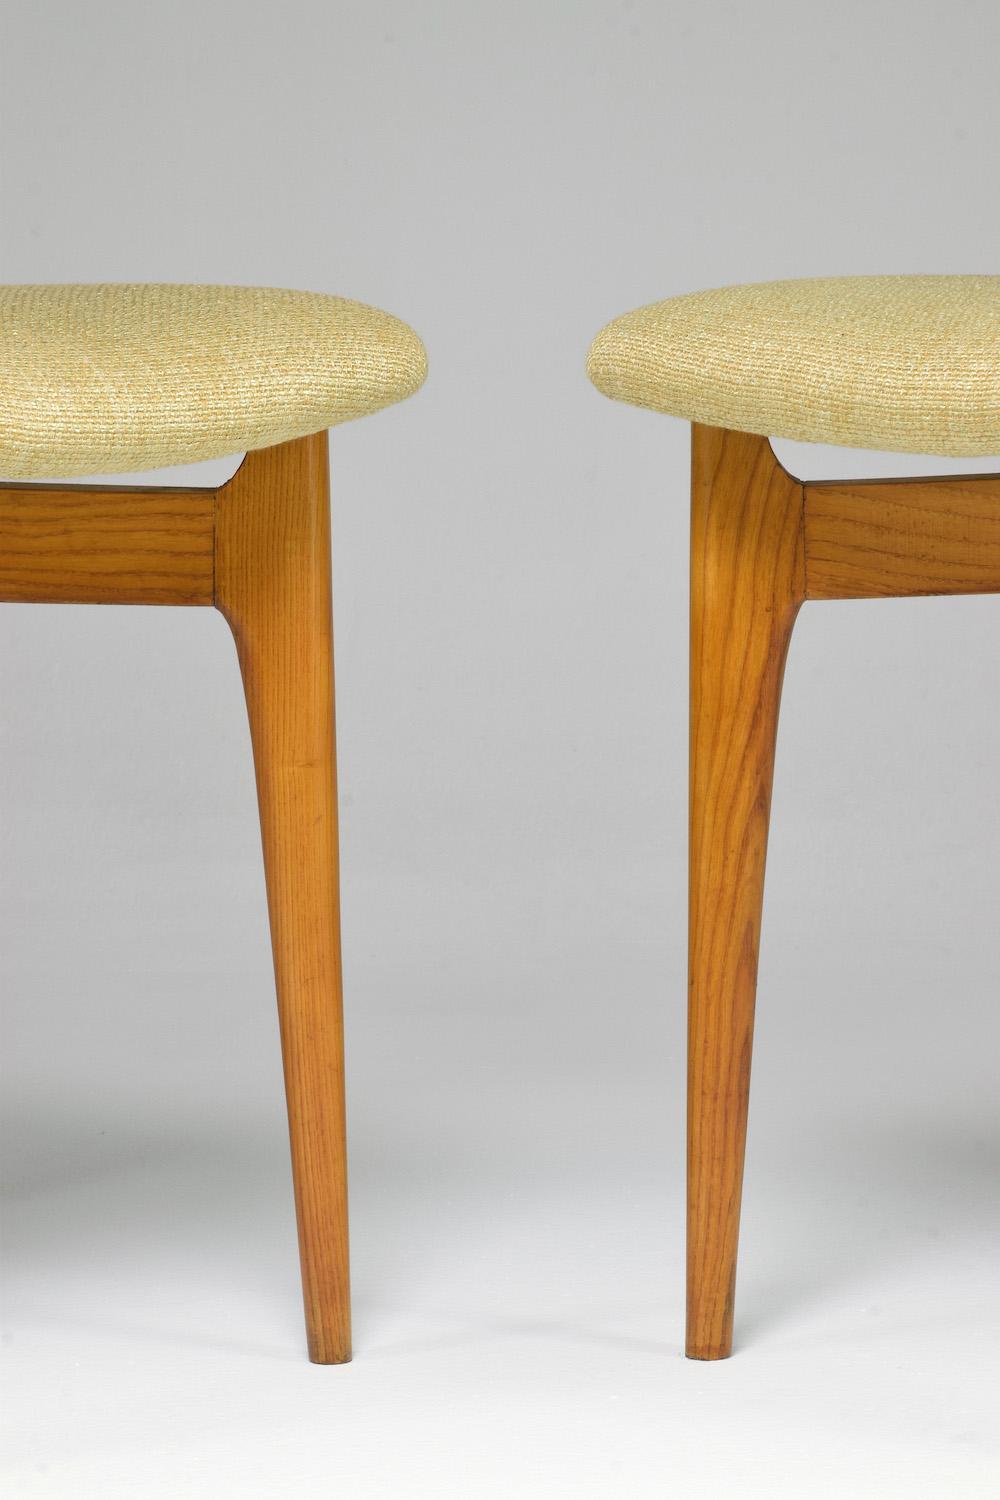 1950's Italian Chairs by Ico and Luisa Parisi for Ariberto Colombo, Set of Two 6